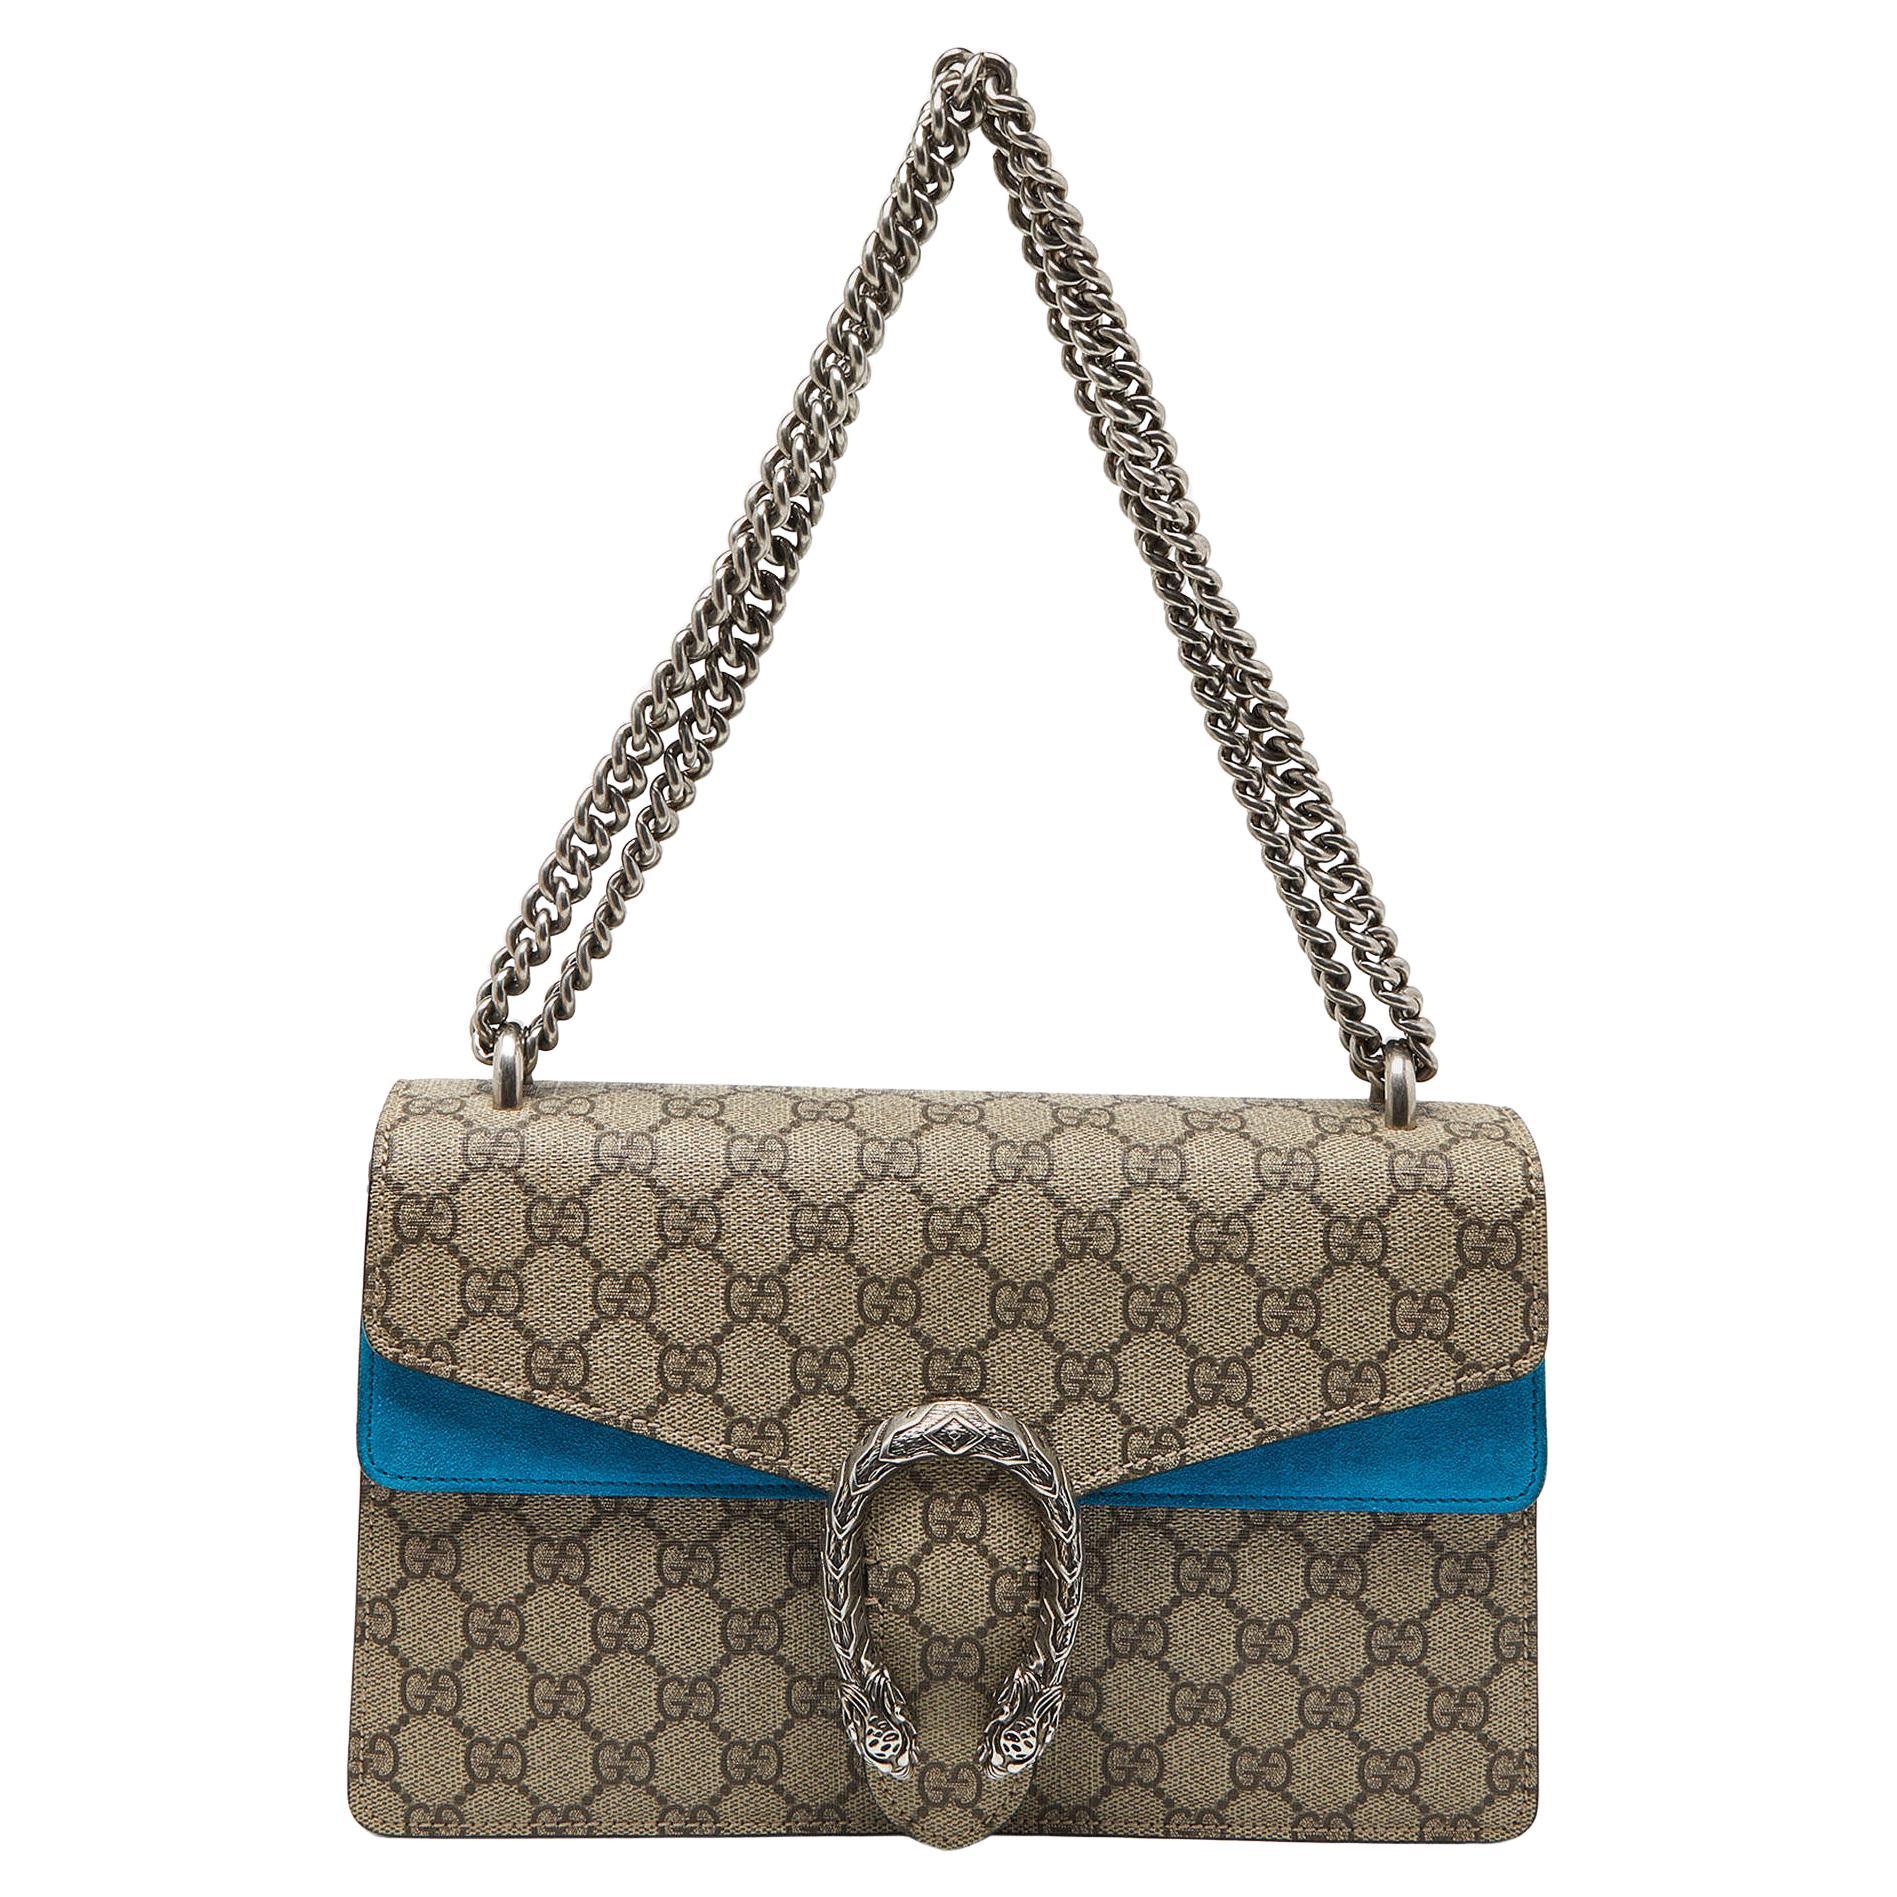 Gucci Beige/Blue GG Supreme Canvas and Suede Small Dionysus Shoulder Bag For Sale